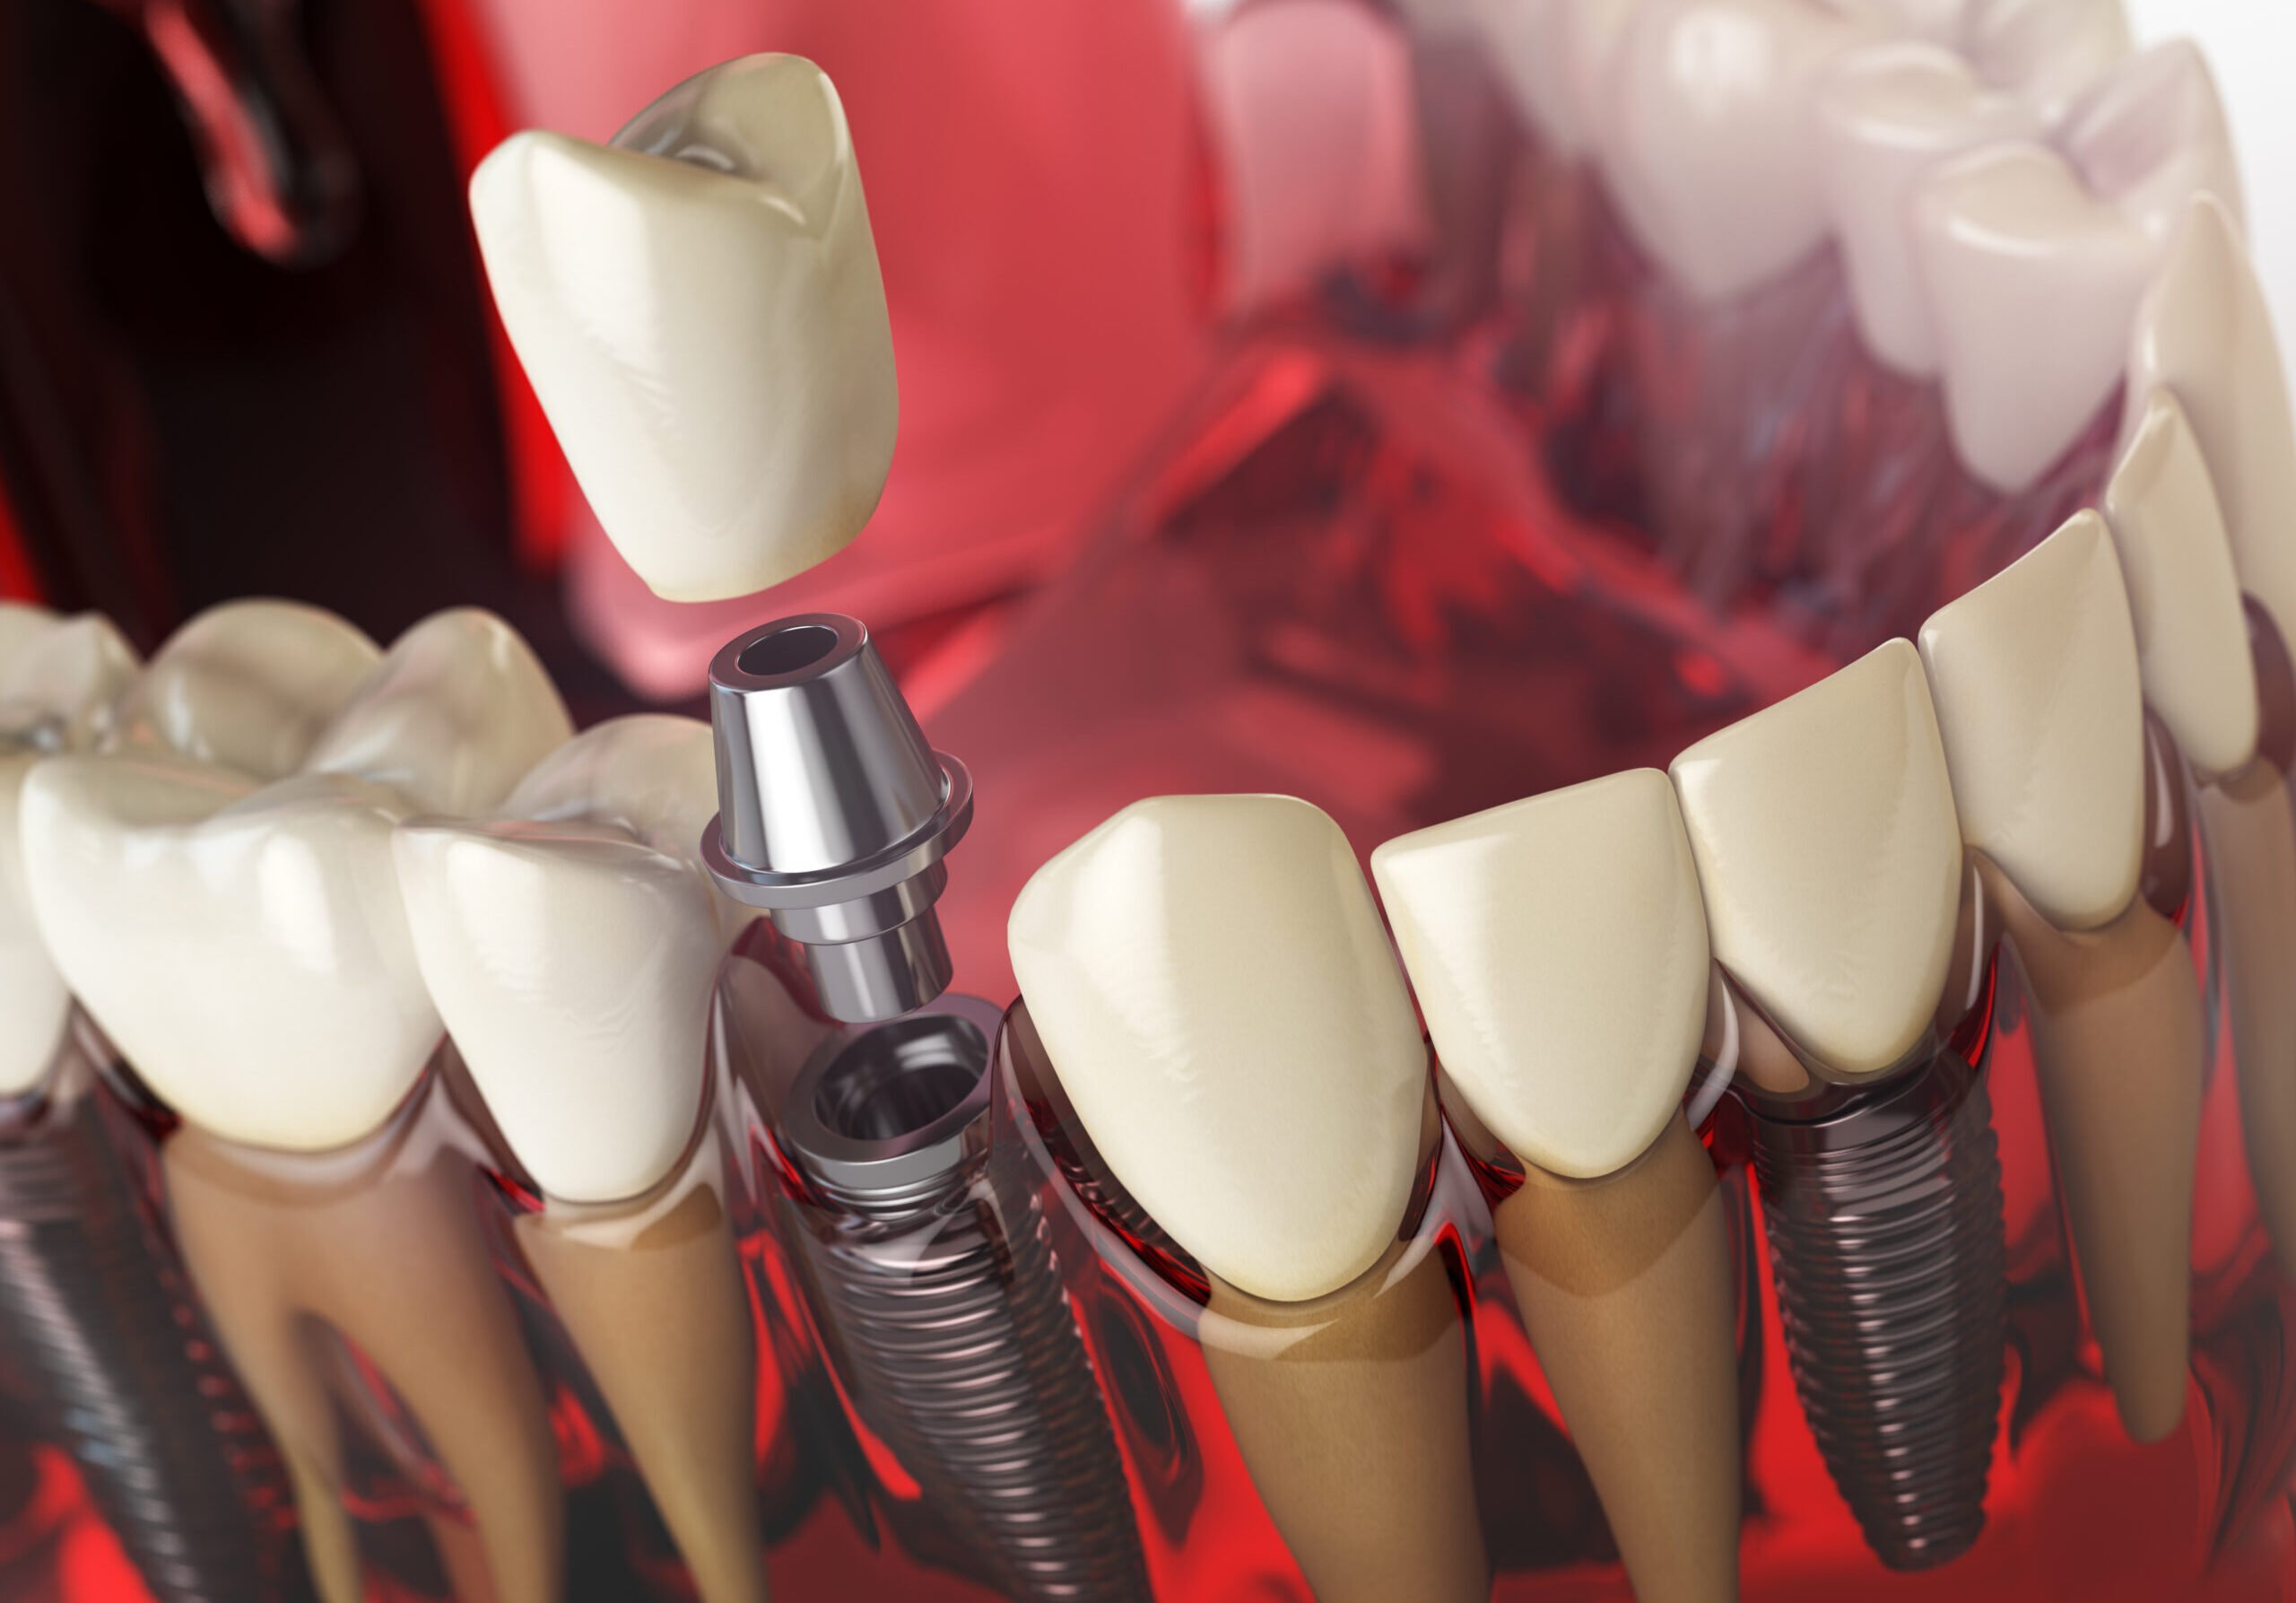 Tooth implant in the model human teeth, gums and denturas. Dental medicine stomatology concept. 3d illustration